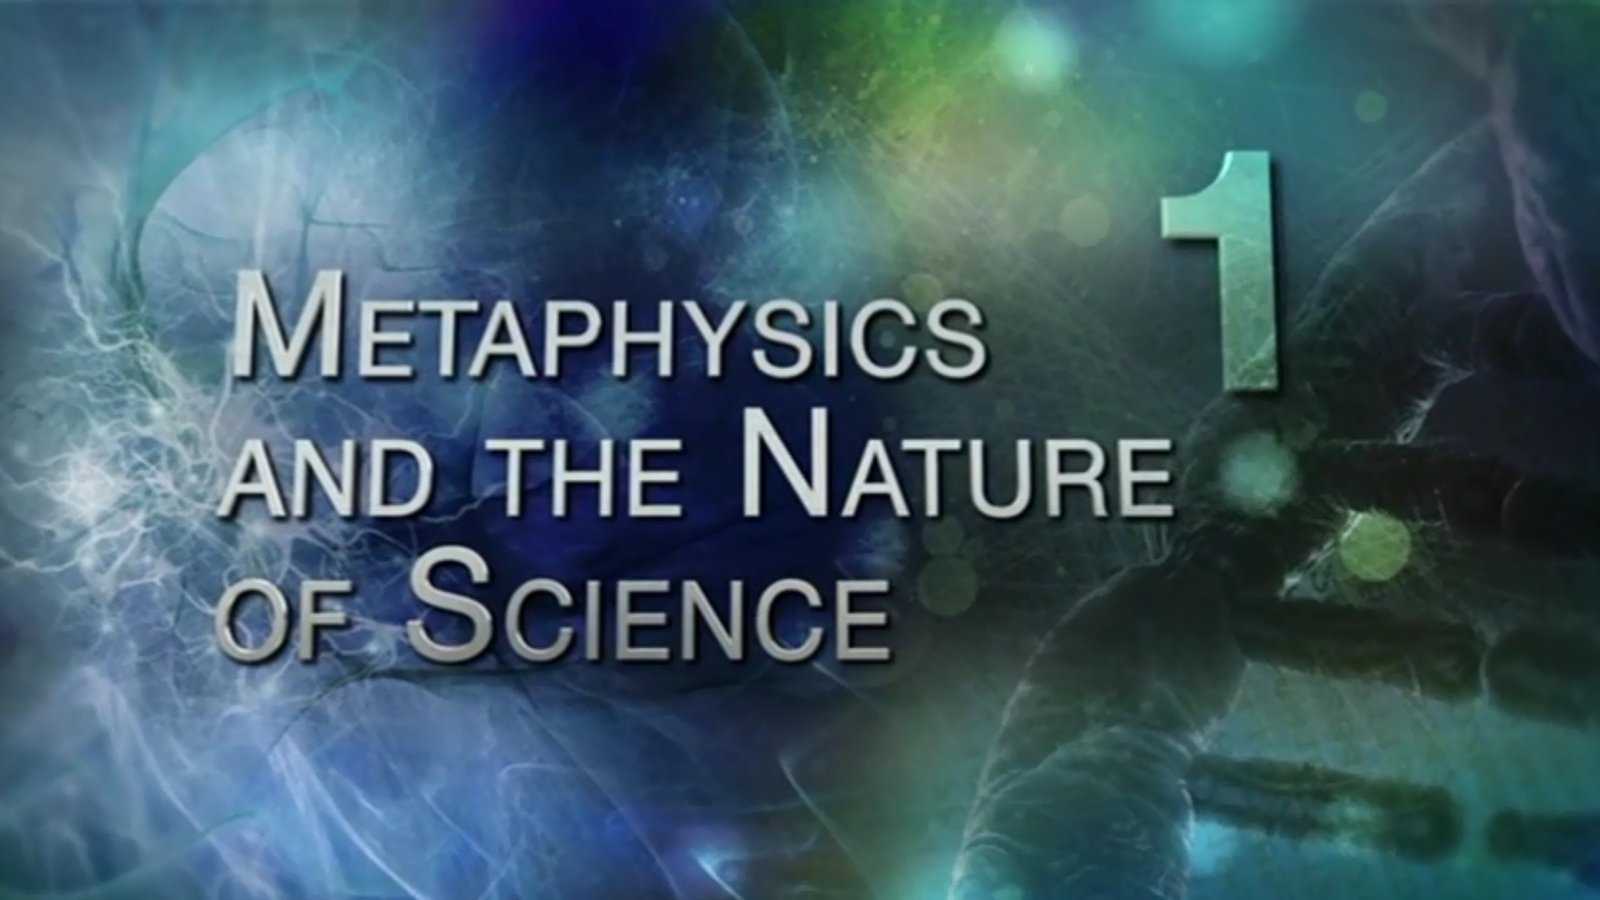 Metaphysics and the Nature of Science